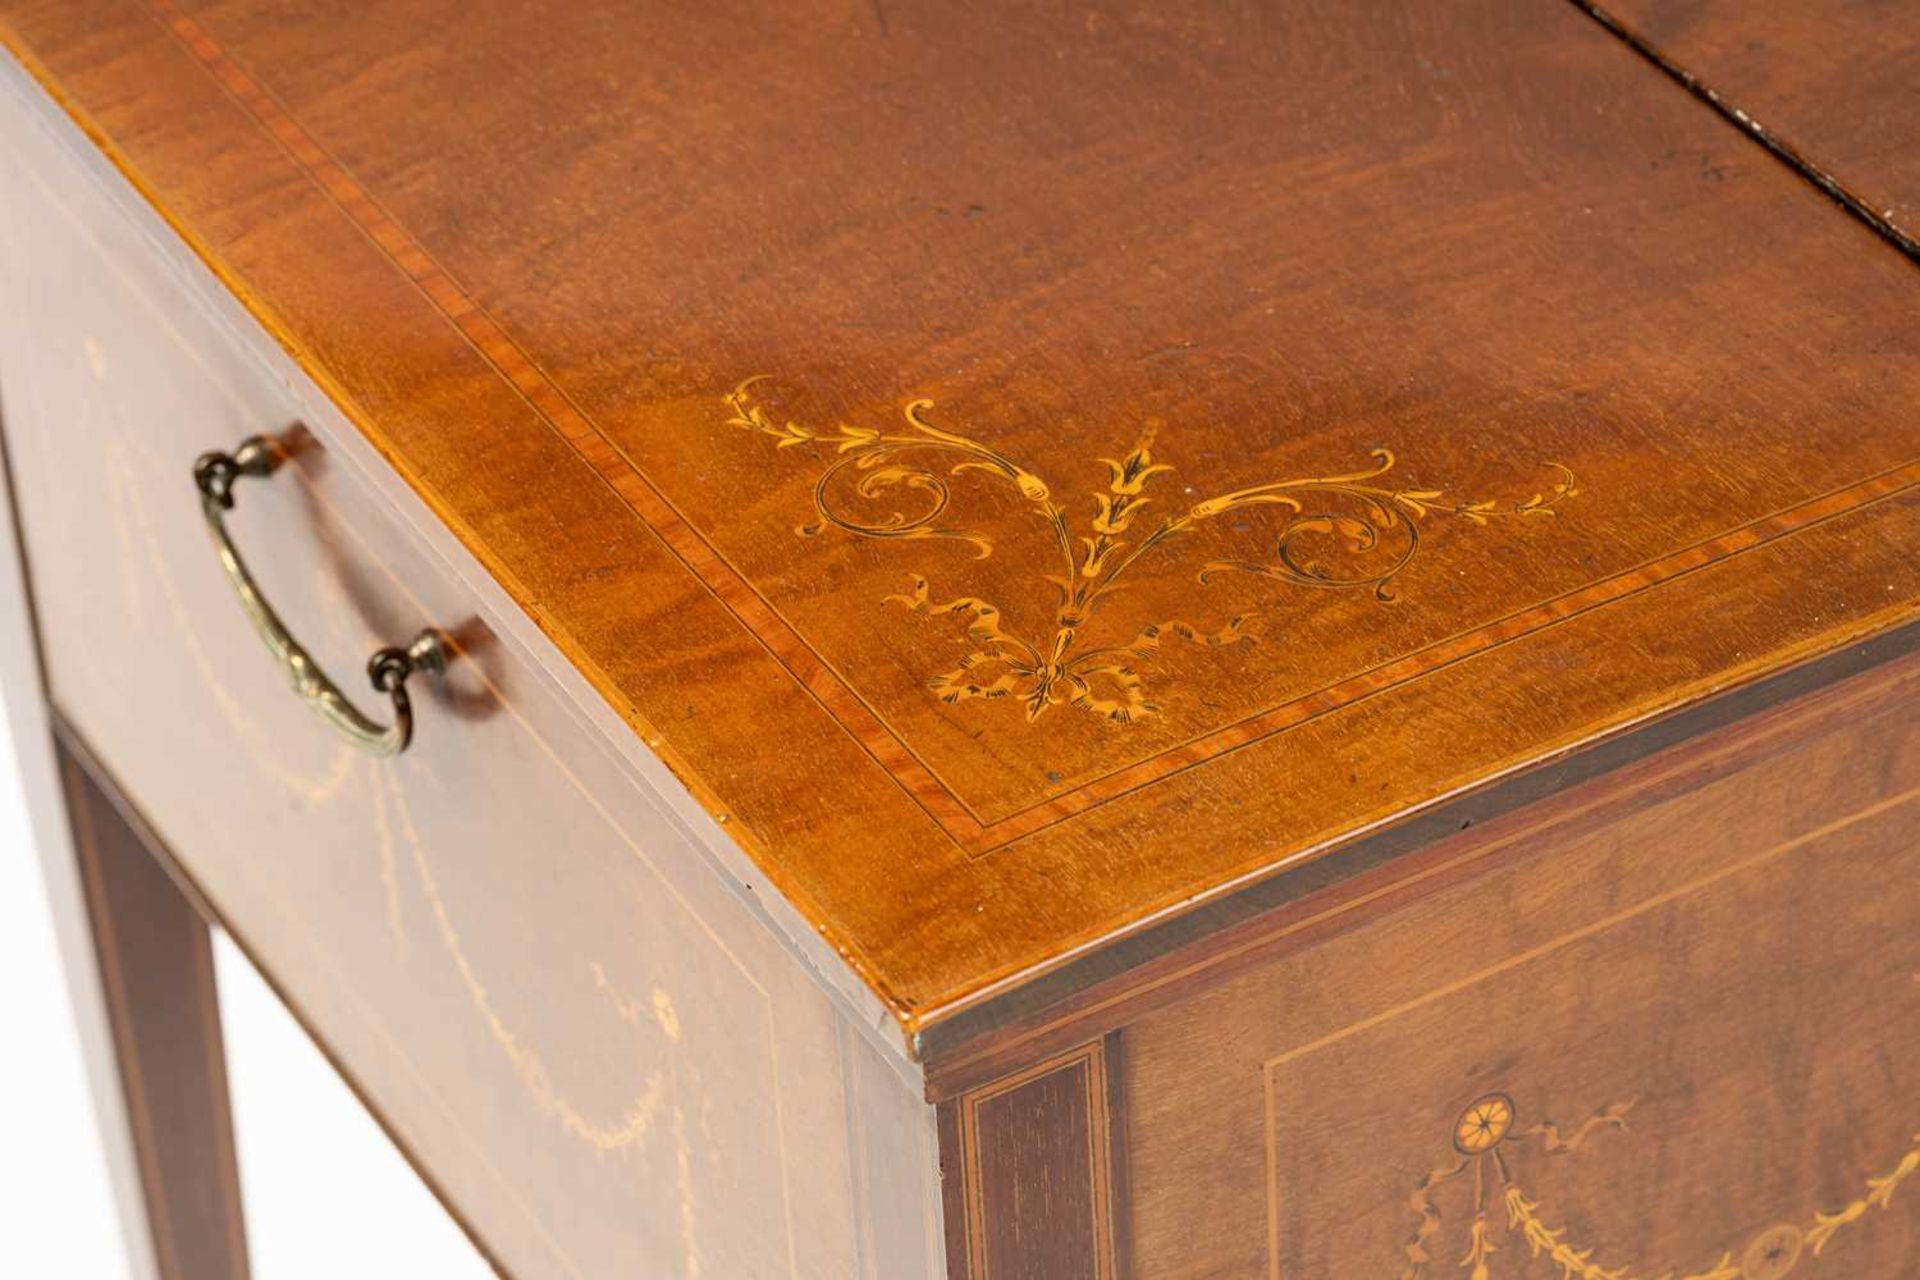 An Edwardian Maple & Co of Tottenham Court Rd, Neo-Classical marquetry inlaid mahogany drinks table, - Image 13 of 19